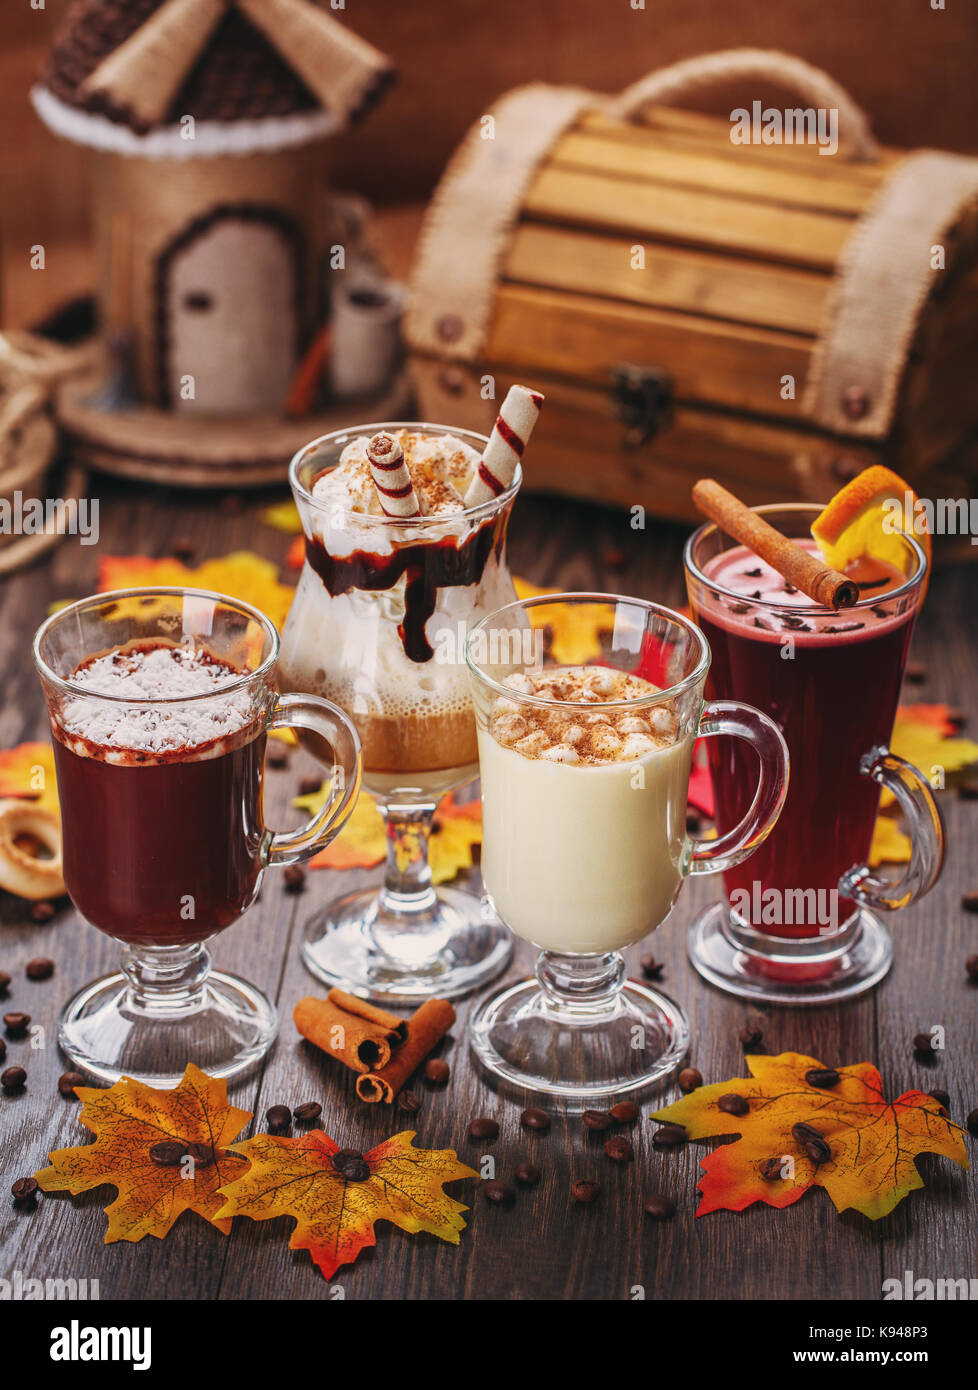 Set of drinks. White Chocolate, Cream, Creamy Cocktails and mulled wine Stock Photo